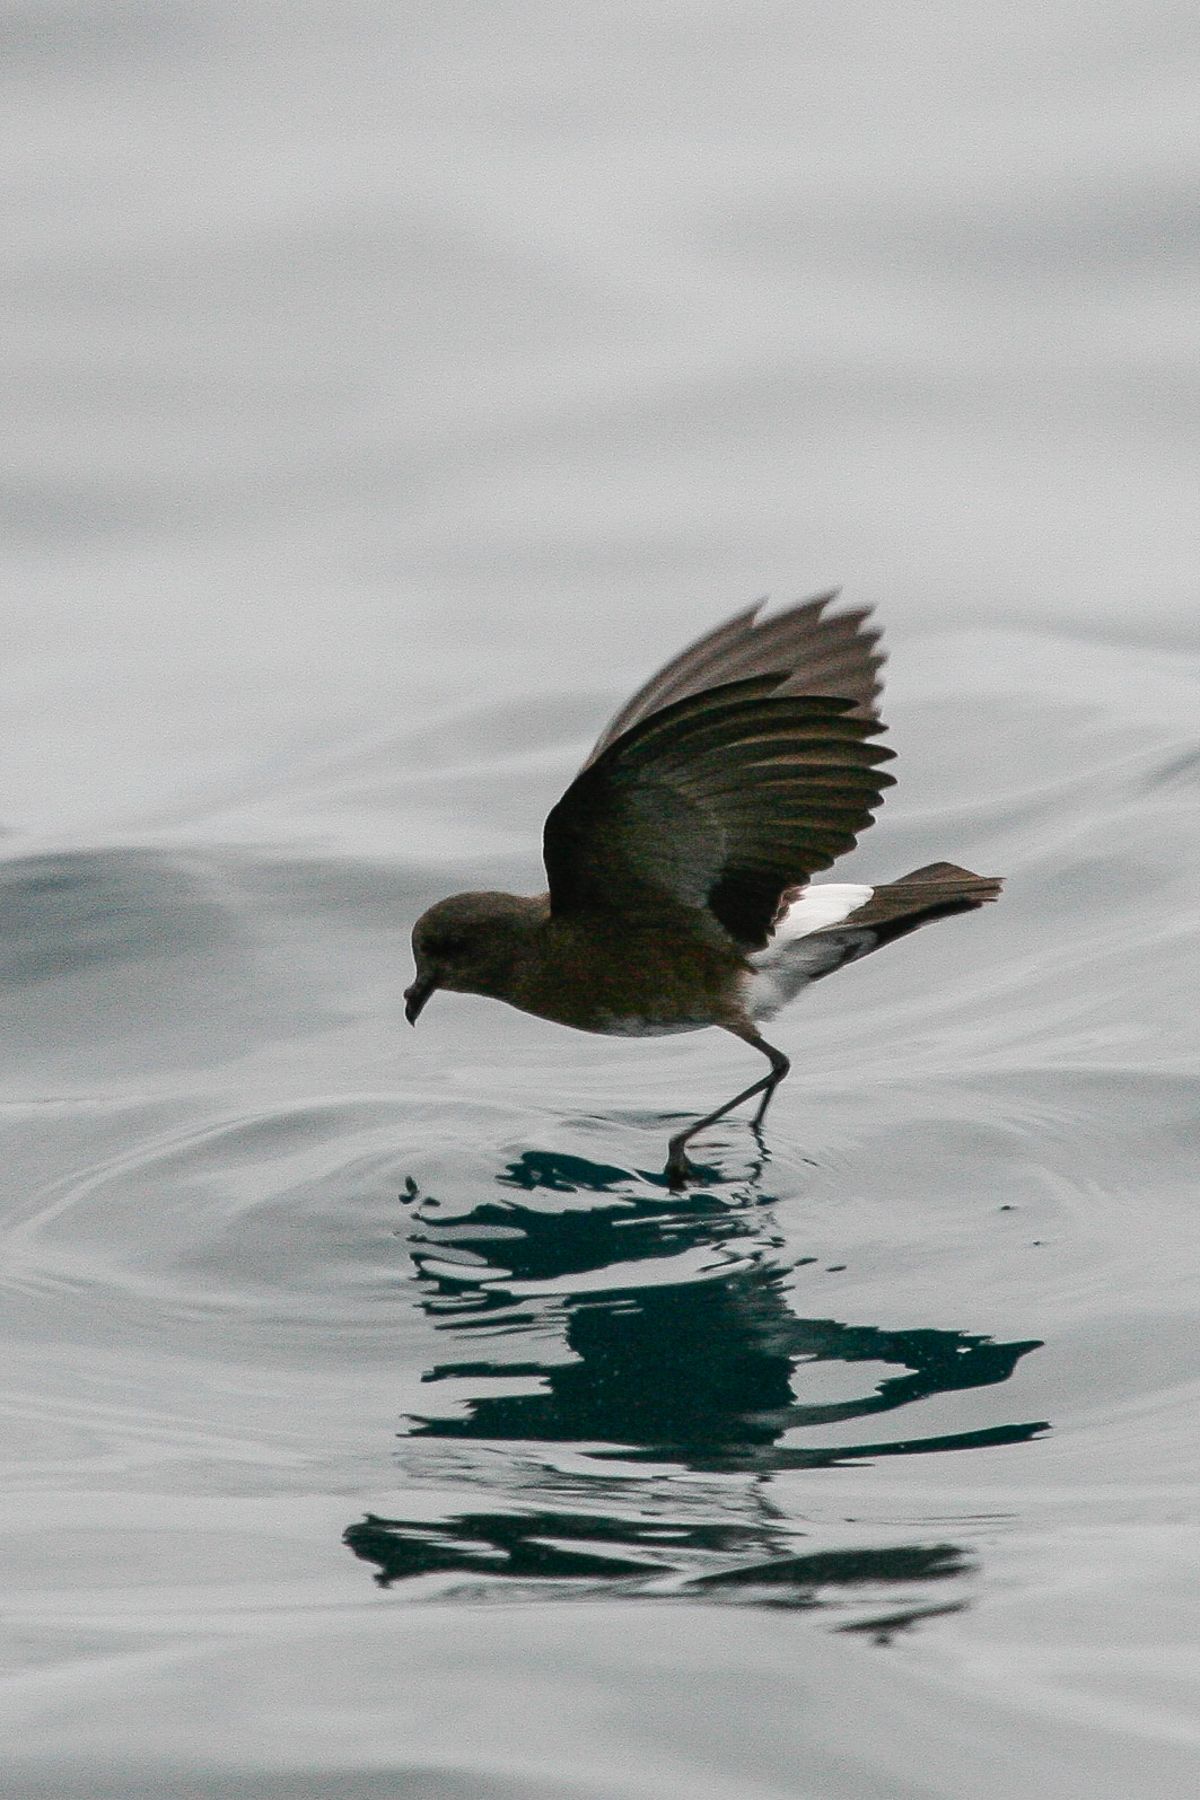 An Elliot's Storm Petrel 'dances' on the water as it feeds